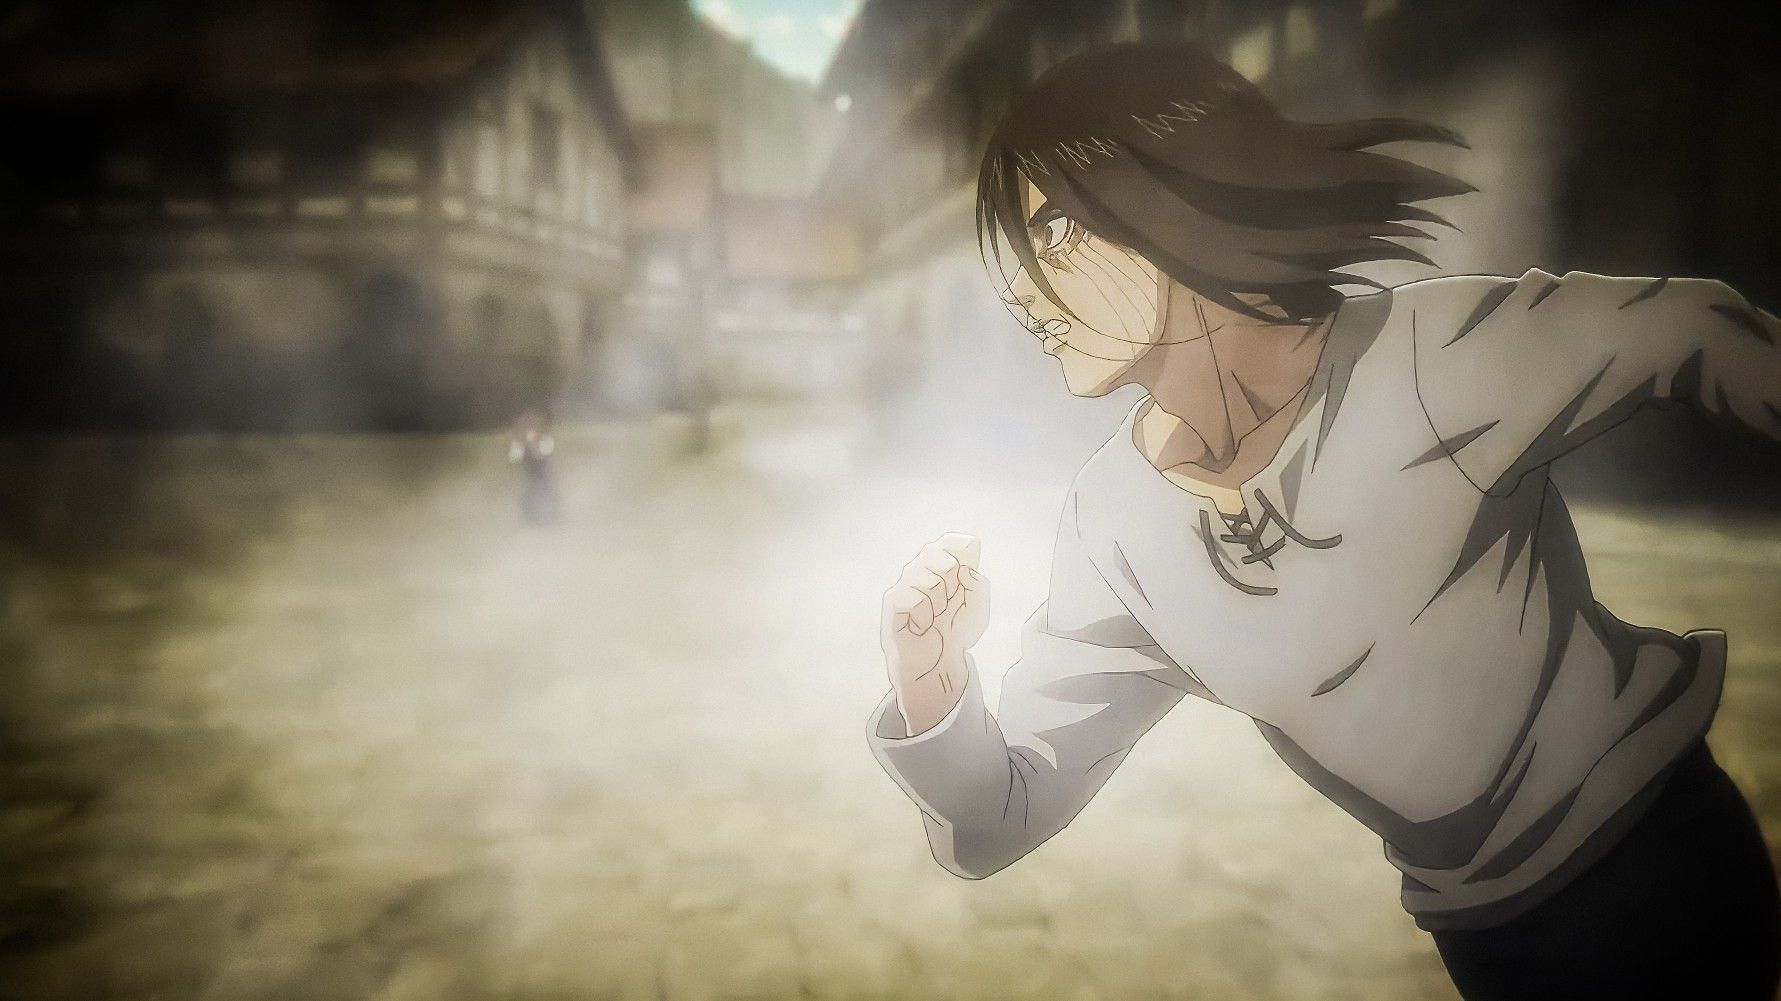 Eren Yeager in Attack on Titan (Image via Mappa)